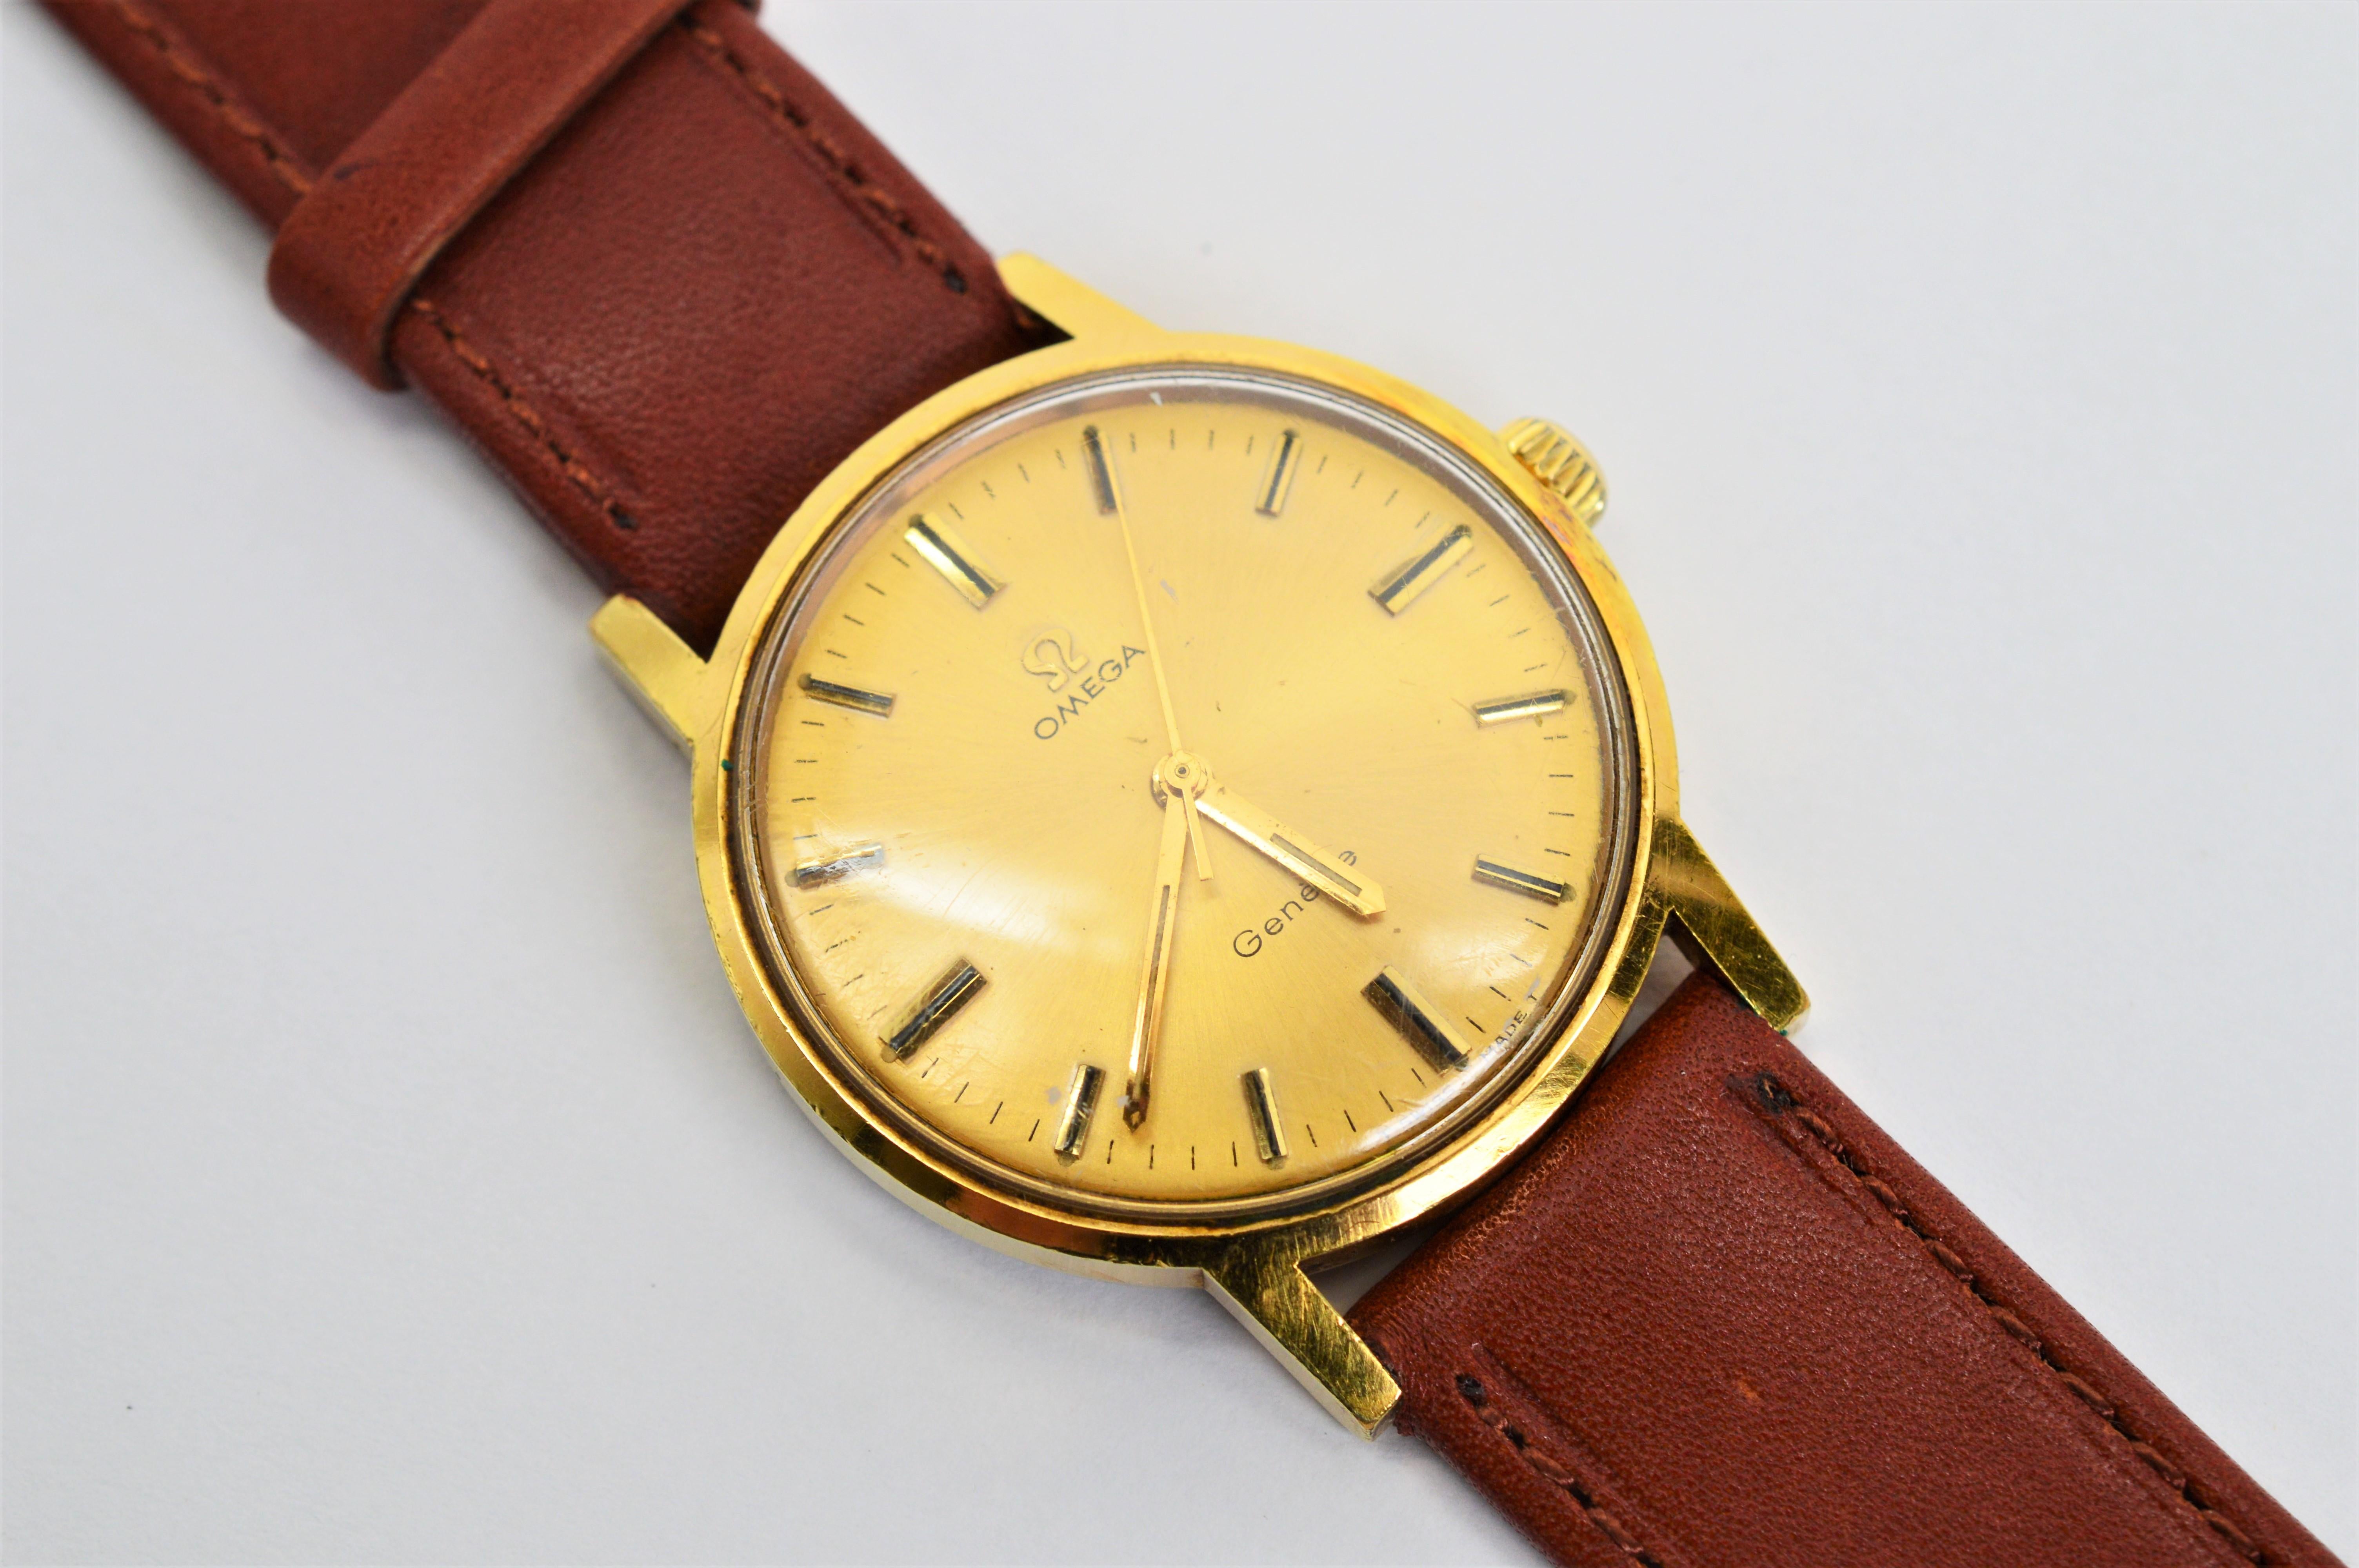 Love this sharp looking 34mm Omega Gold Top Steel Men's Classic. Sporting a round gold toned dial and matchstick numerals, this circa 1969 wrist watch keeps time with a seventeen jeweled mechanical manual wind Omega movement. This vintage timepiece